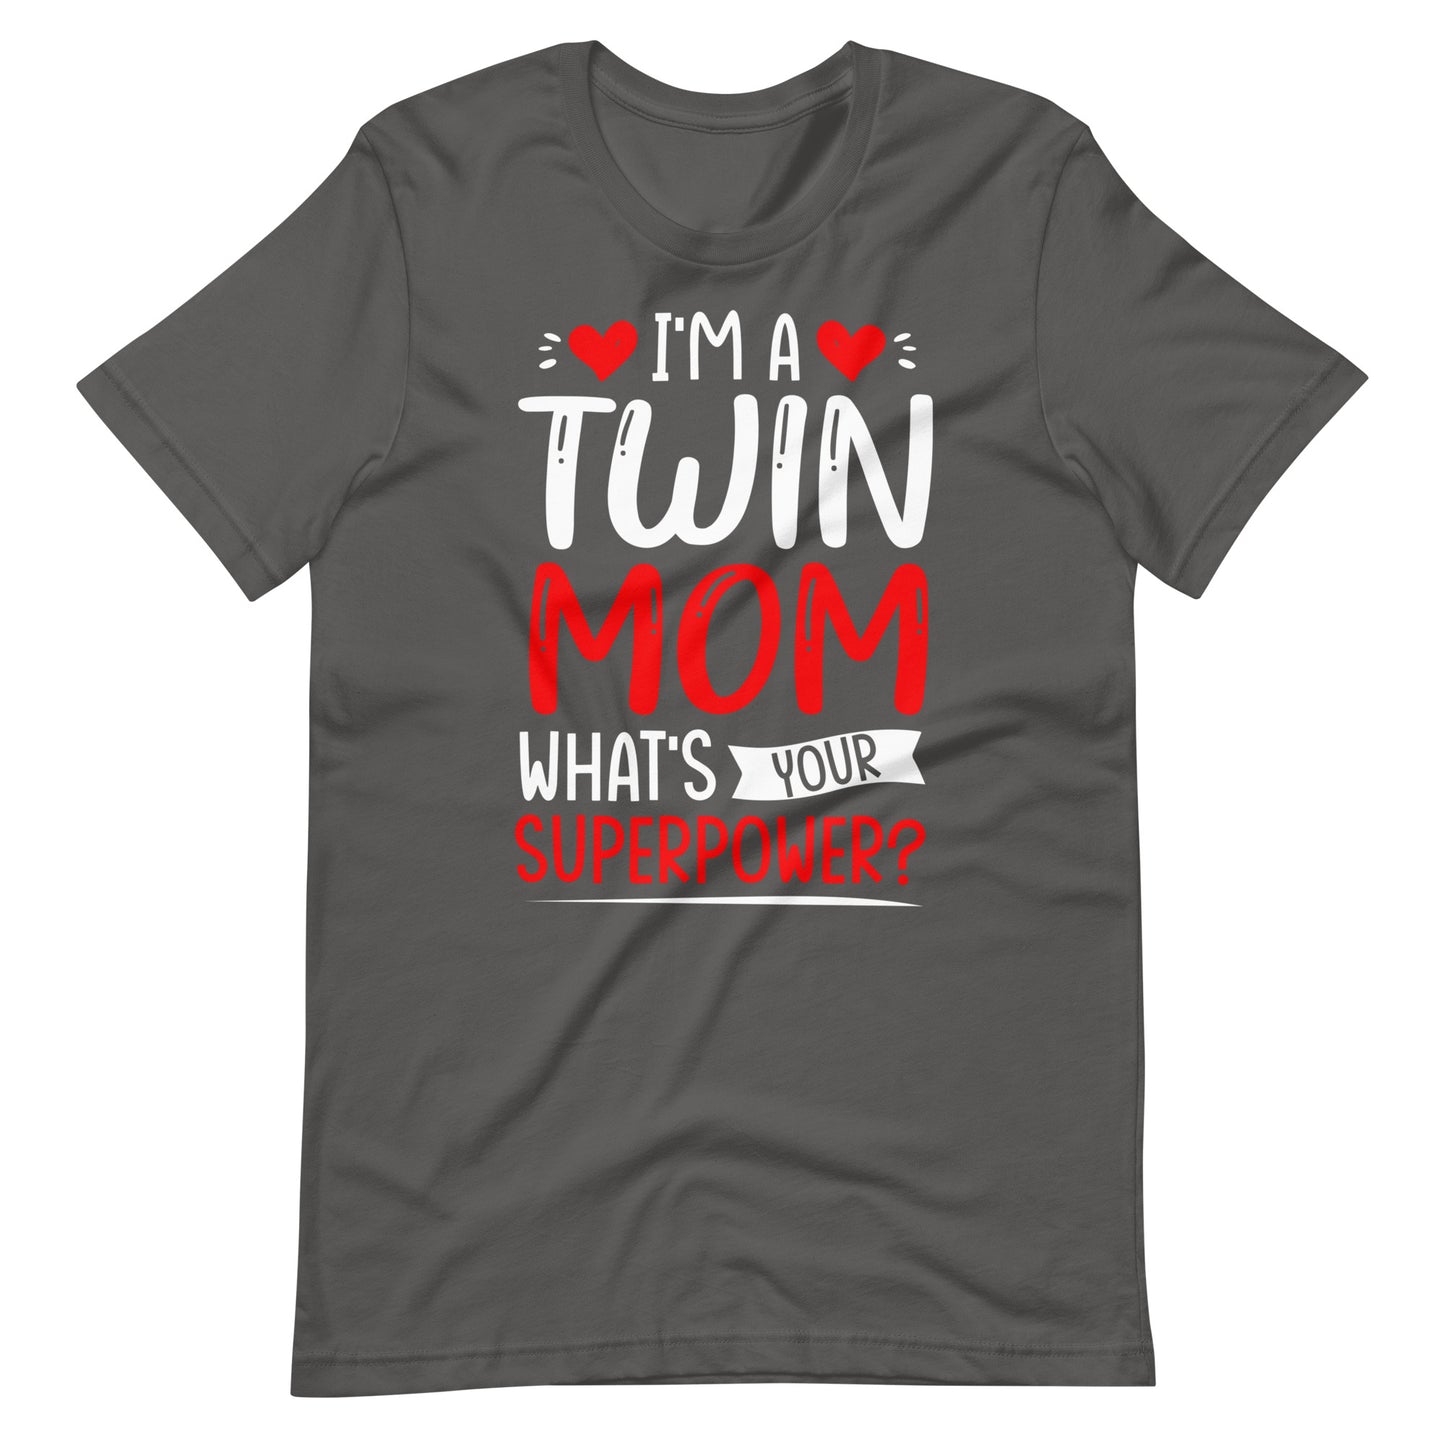 I'm A Twin Mom What's Your Superpower?